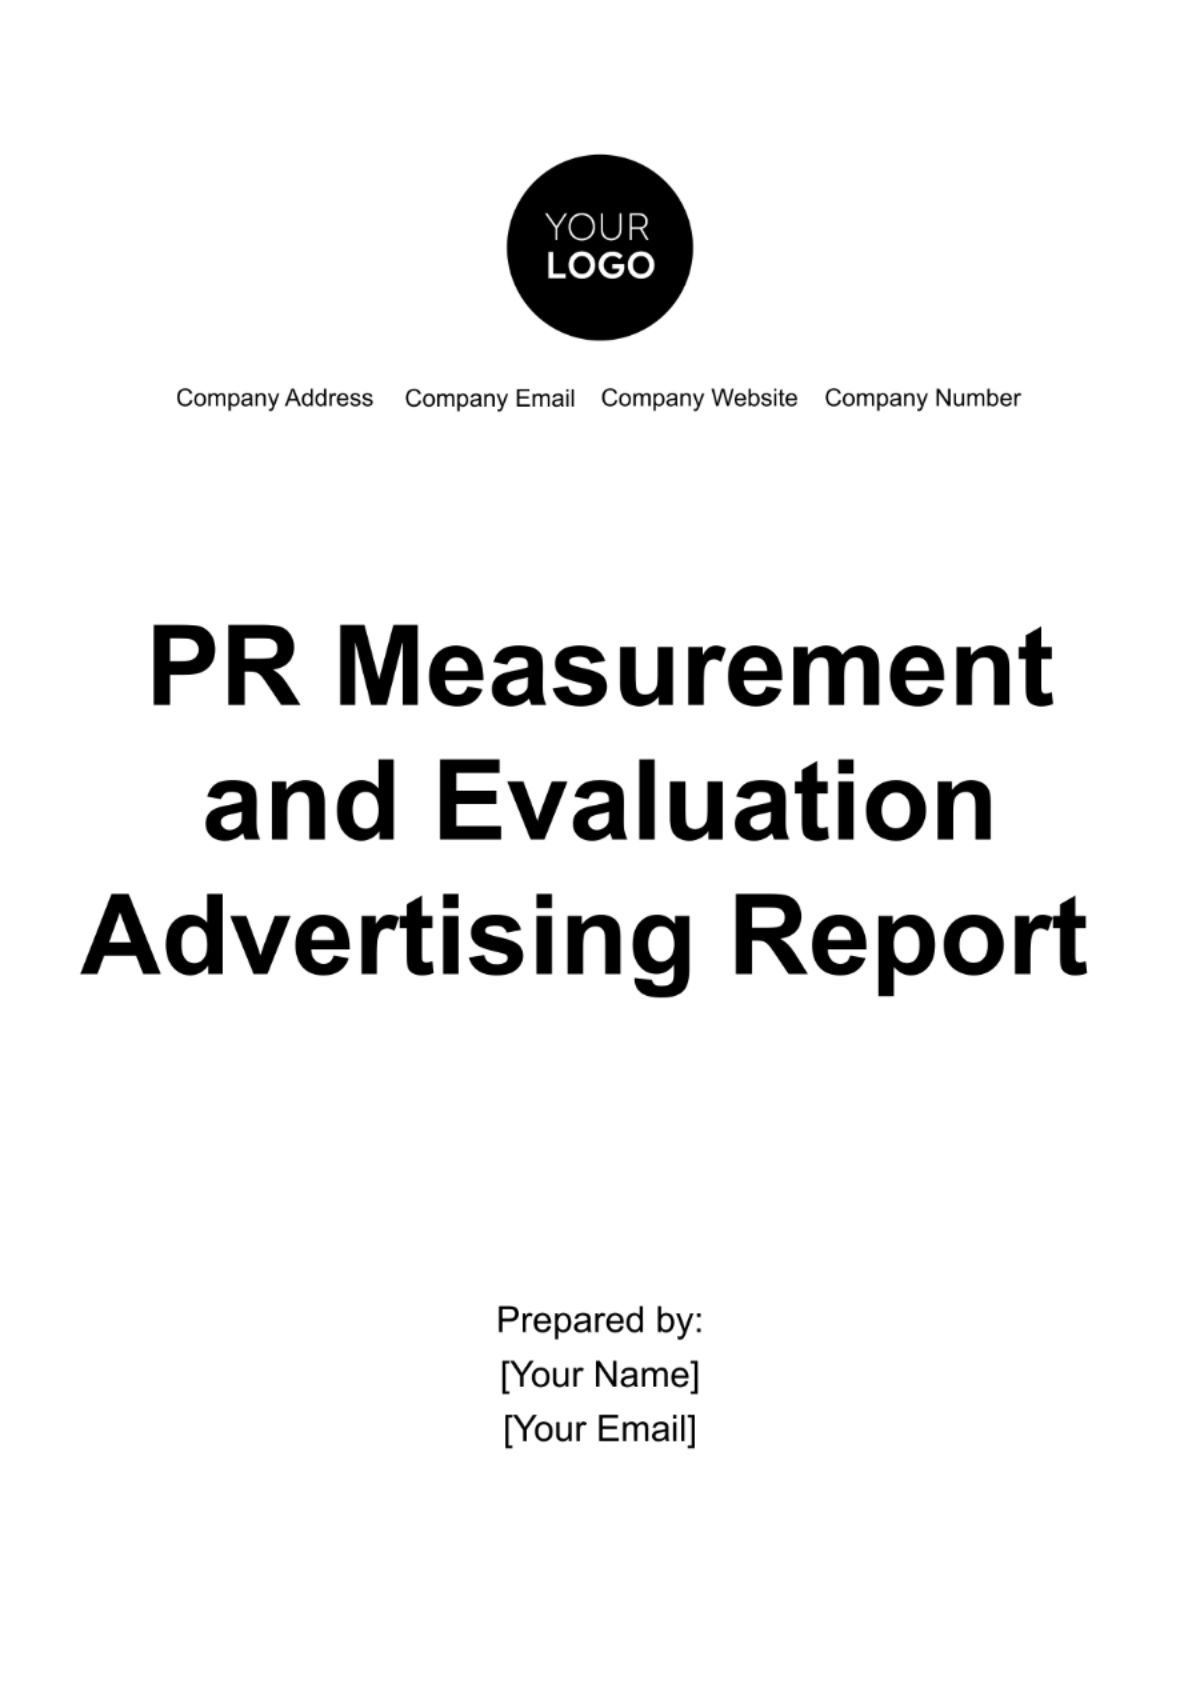 PR Measurement and Evaluation Advertising Report Template